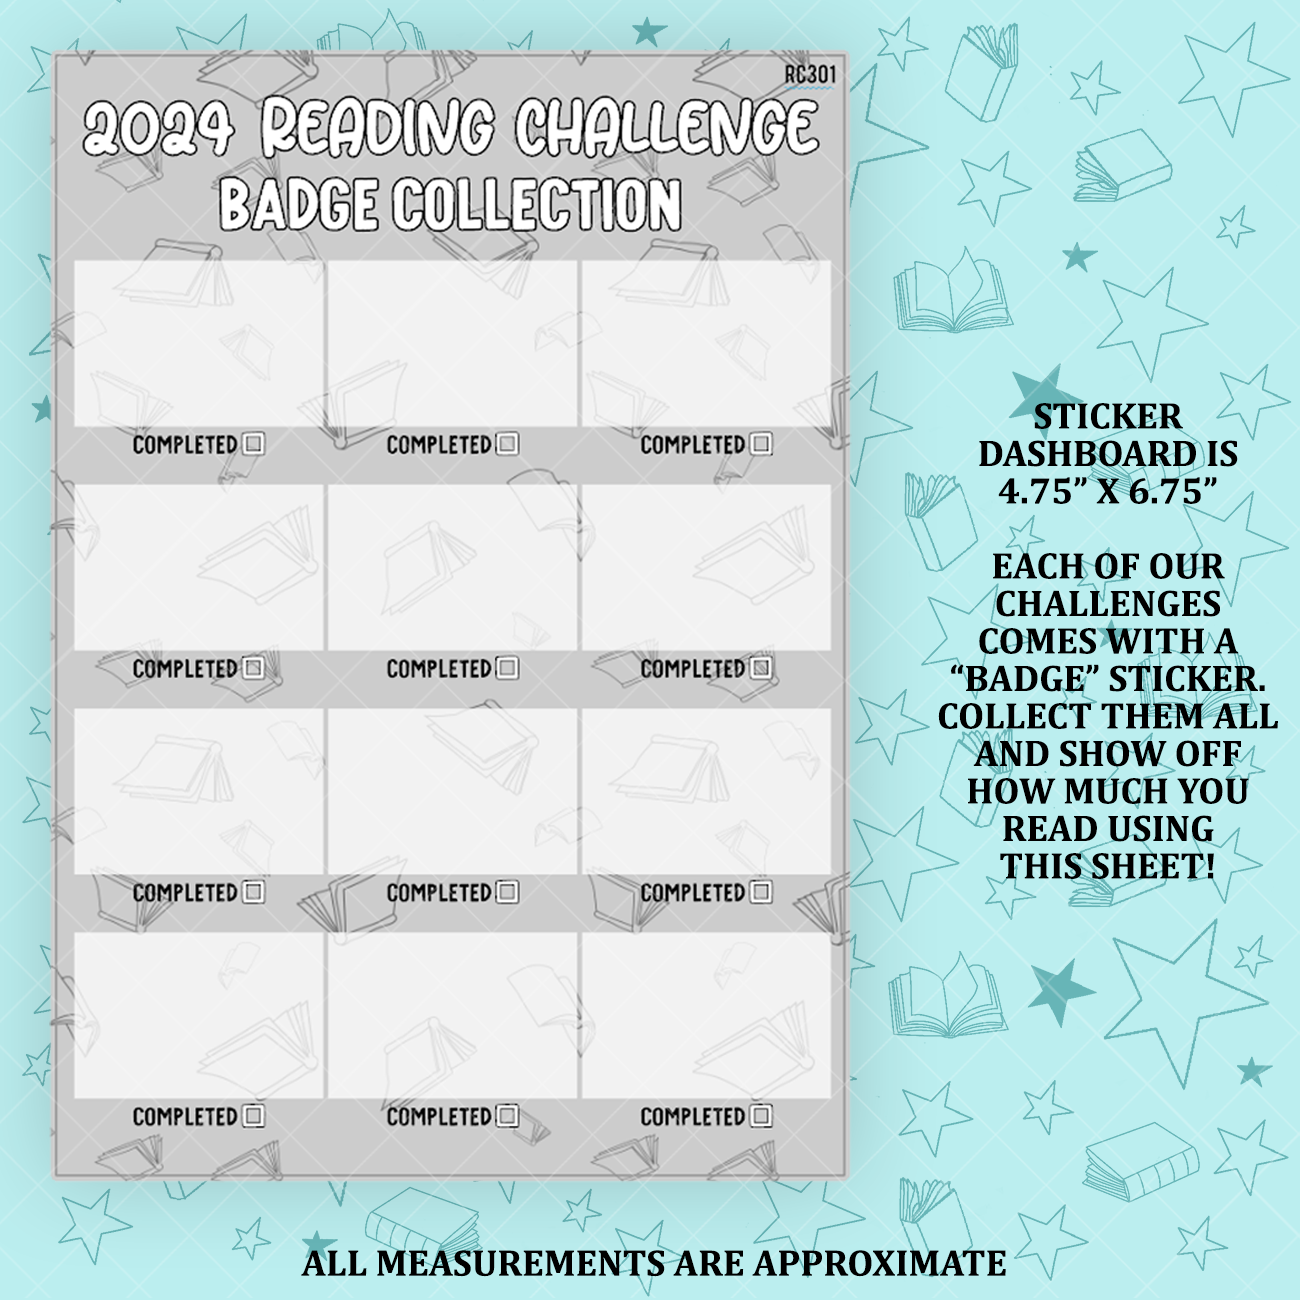 2024 Badge Collection and Reading Challenge 5x7 Dashboard and Sticker Tracker - RC301